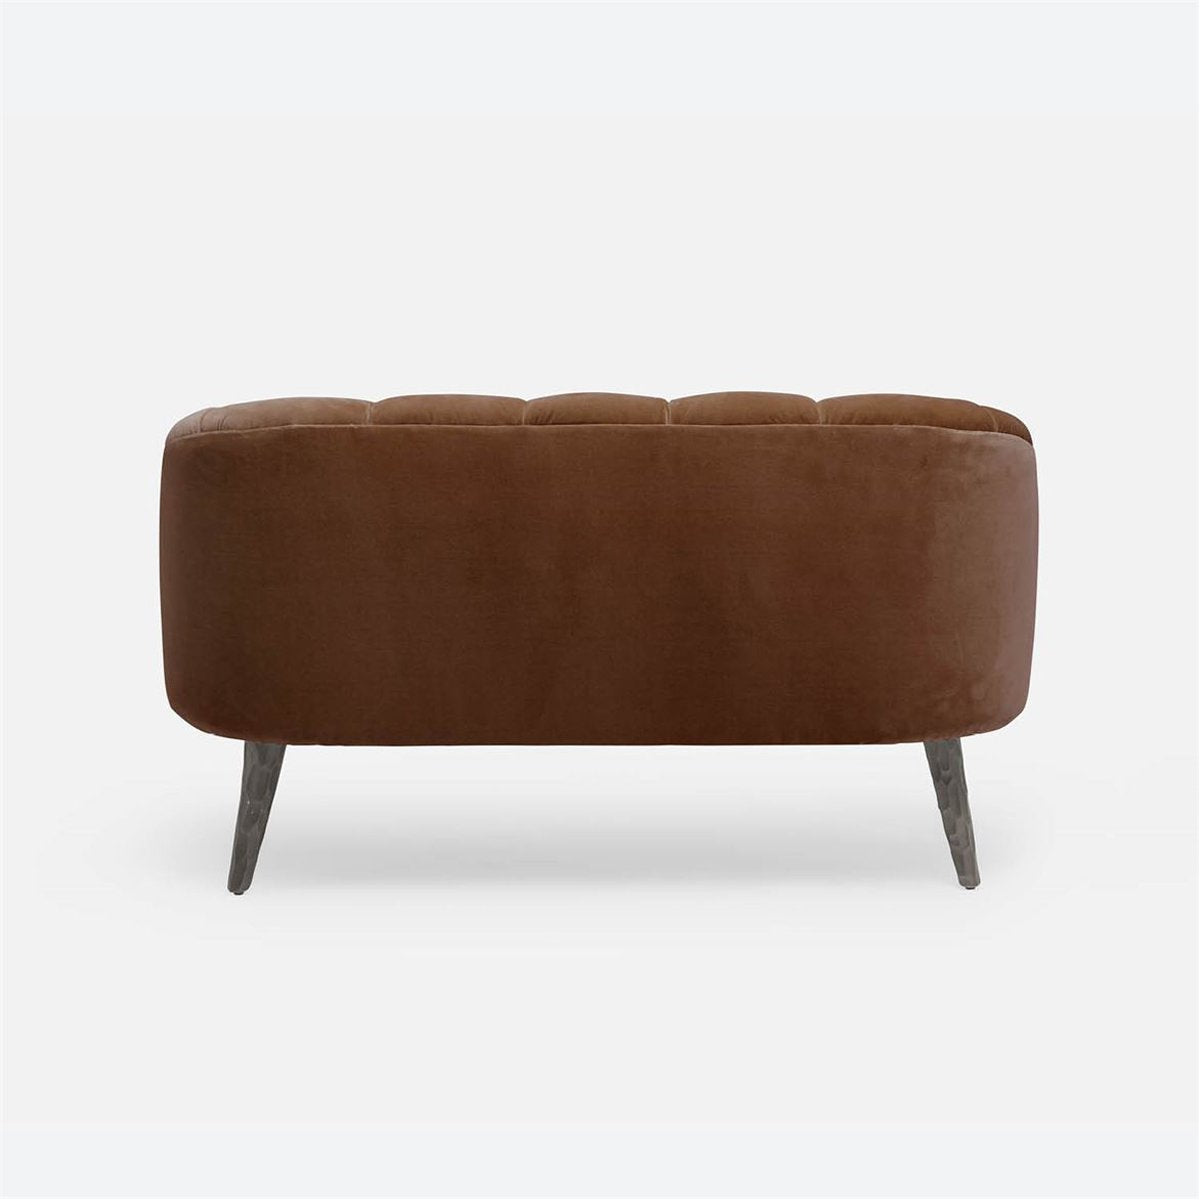 Made Goods Rooney Upholstered Shell 54-Inch Sofette in Rhone Leather